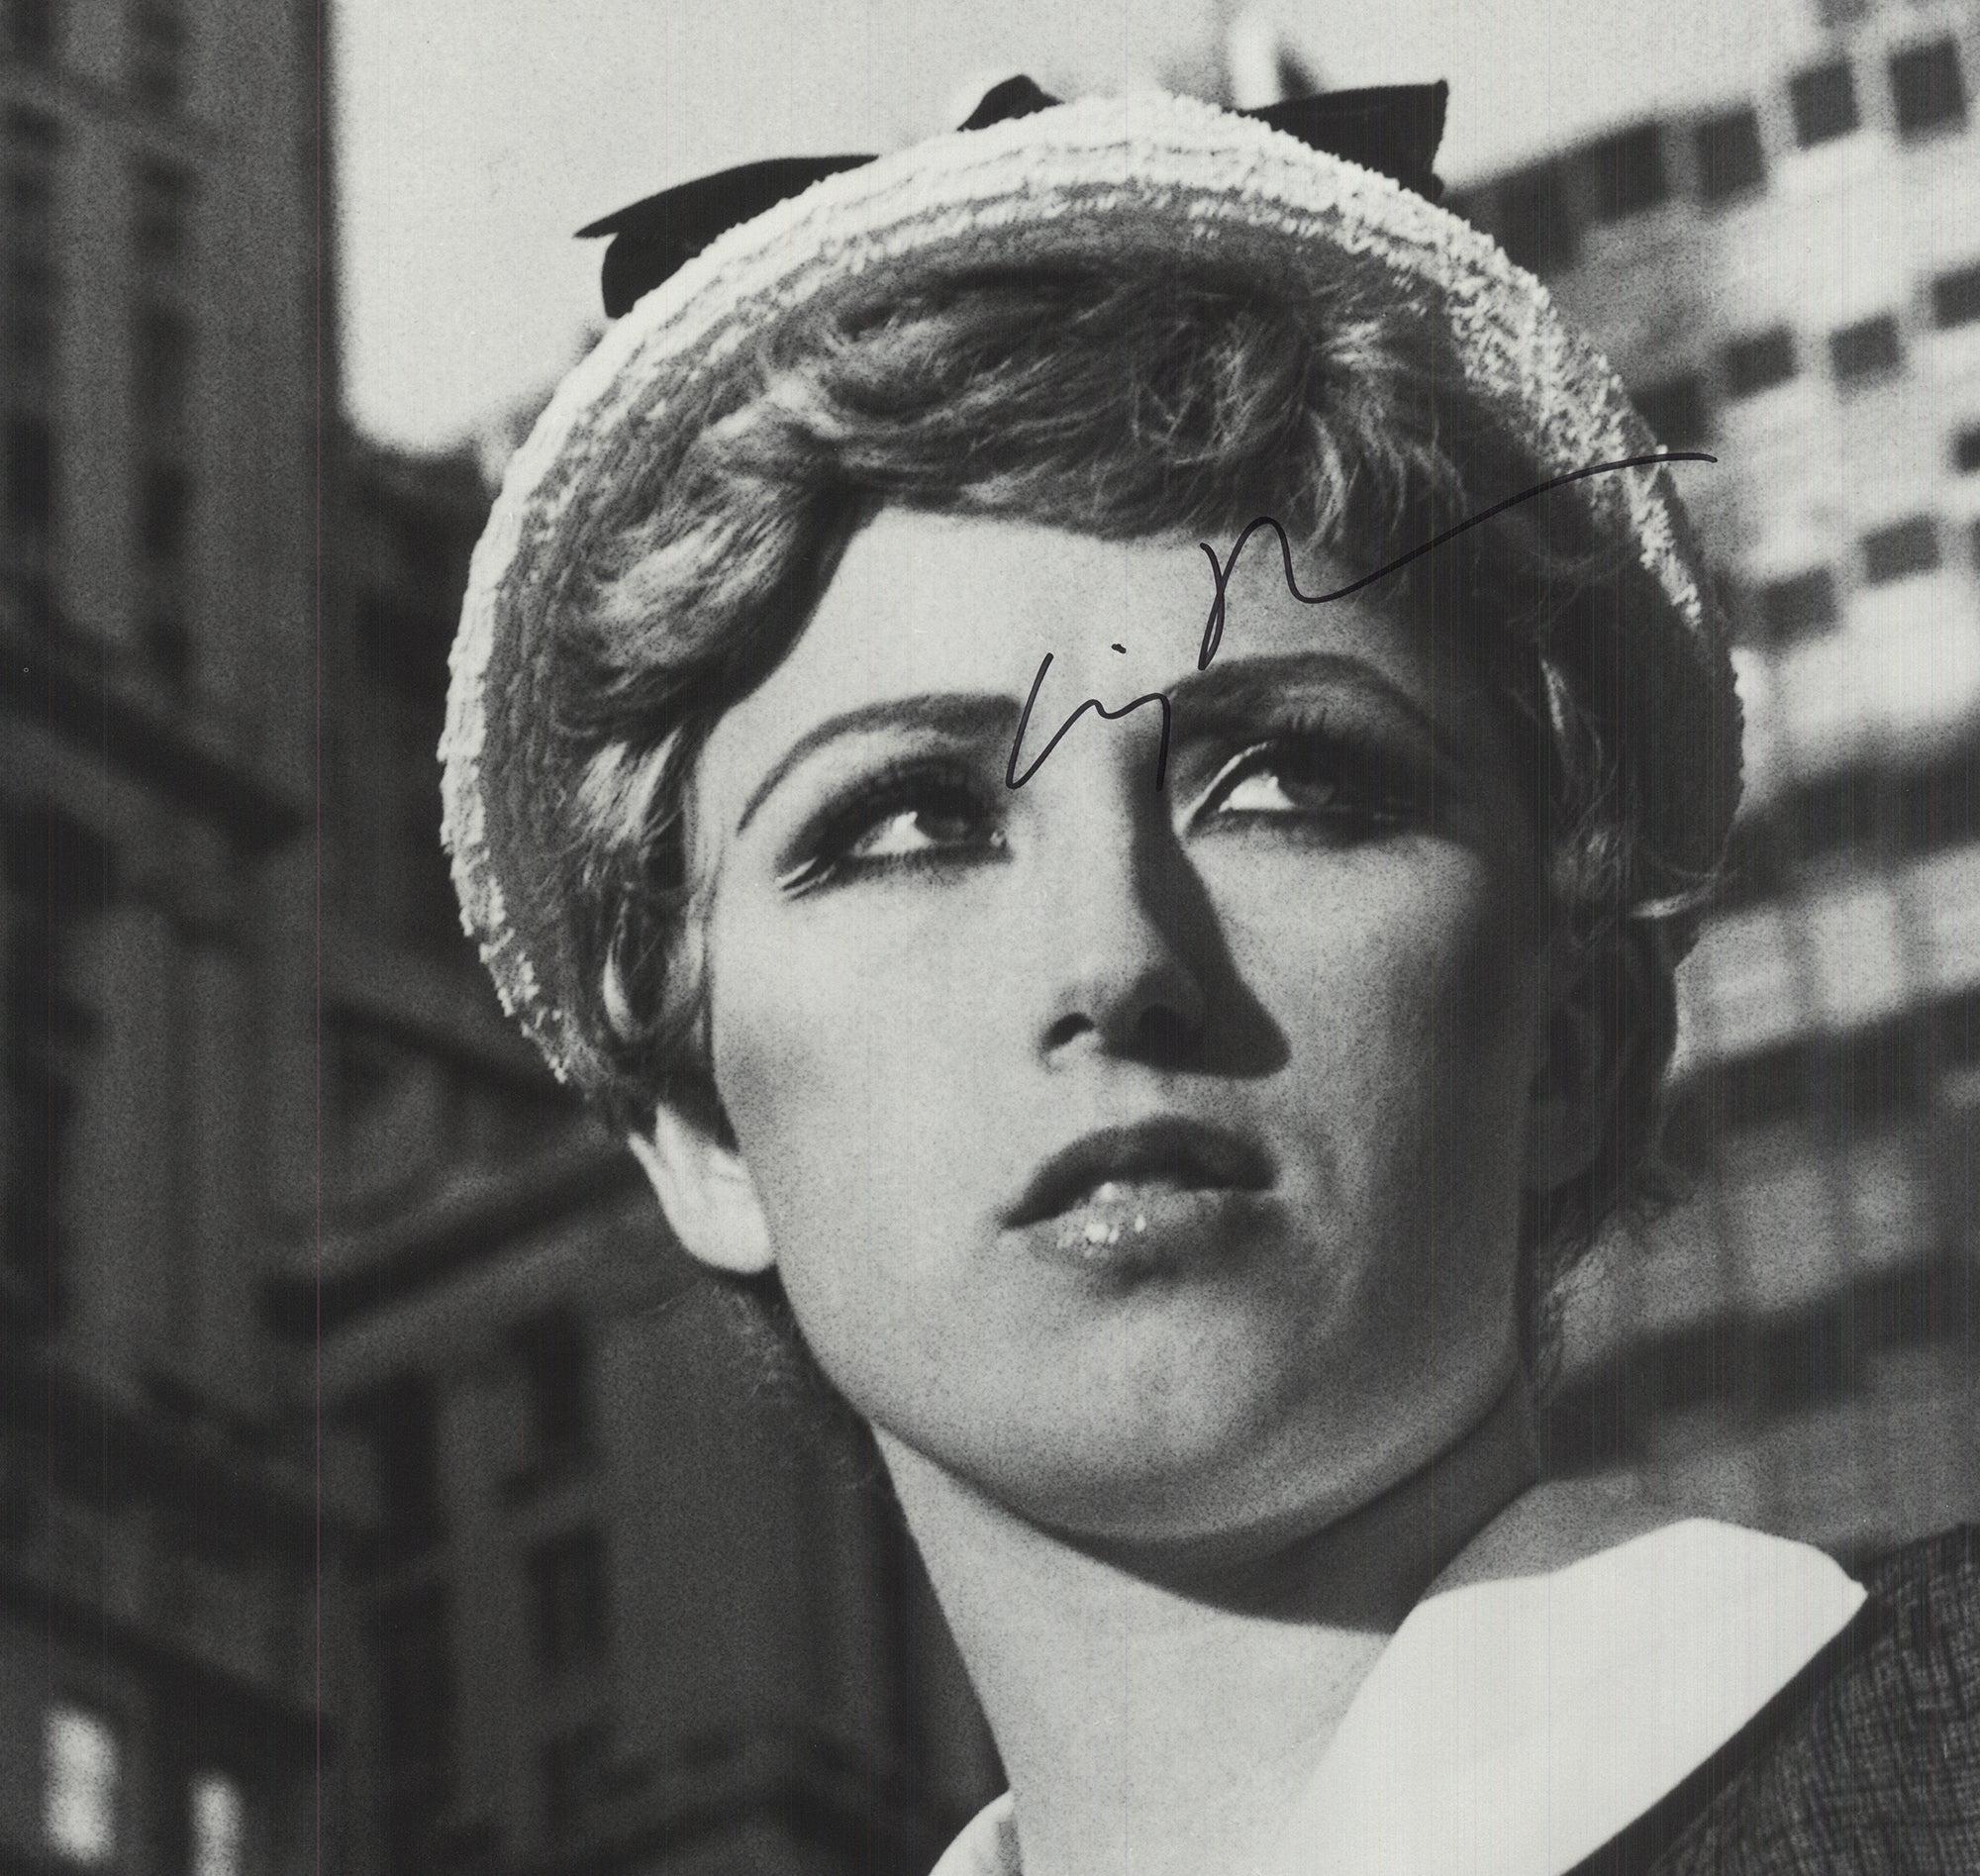 Sku: YY2947-B
Artist: Cindy Sherman
Title: Untitled Film Still #21
Year: 1997
Signed: Yes
Medium: Offset Lithograph
Paper Size: 26.5 x 29.25 inches ( 67.31 x 74.295 cm )
Image Size: 21.25 x 26.5 inches ( 53.975 x 67.31 cm )
Edition Size: